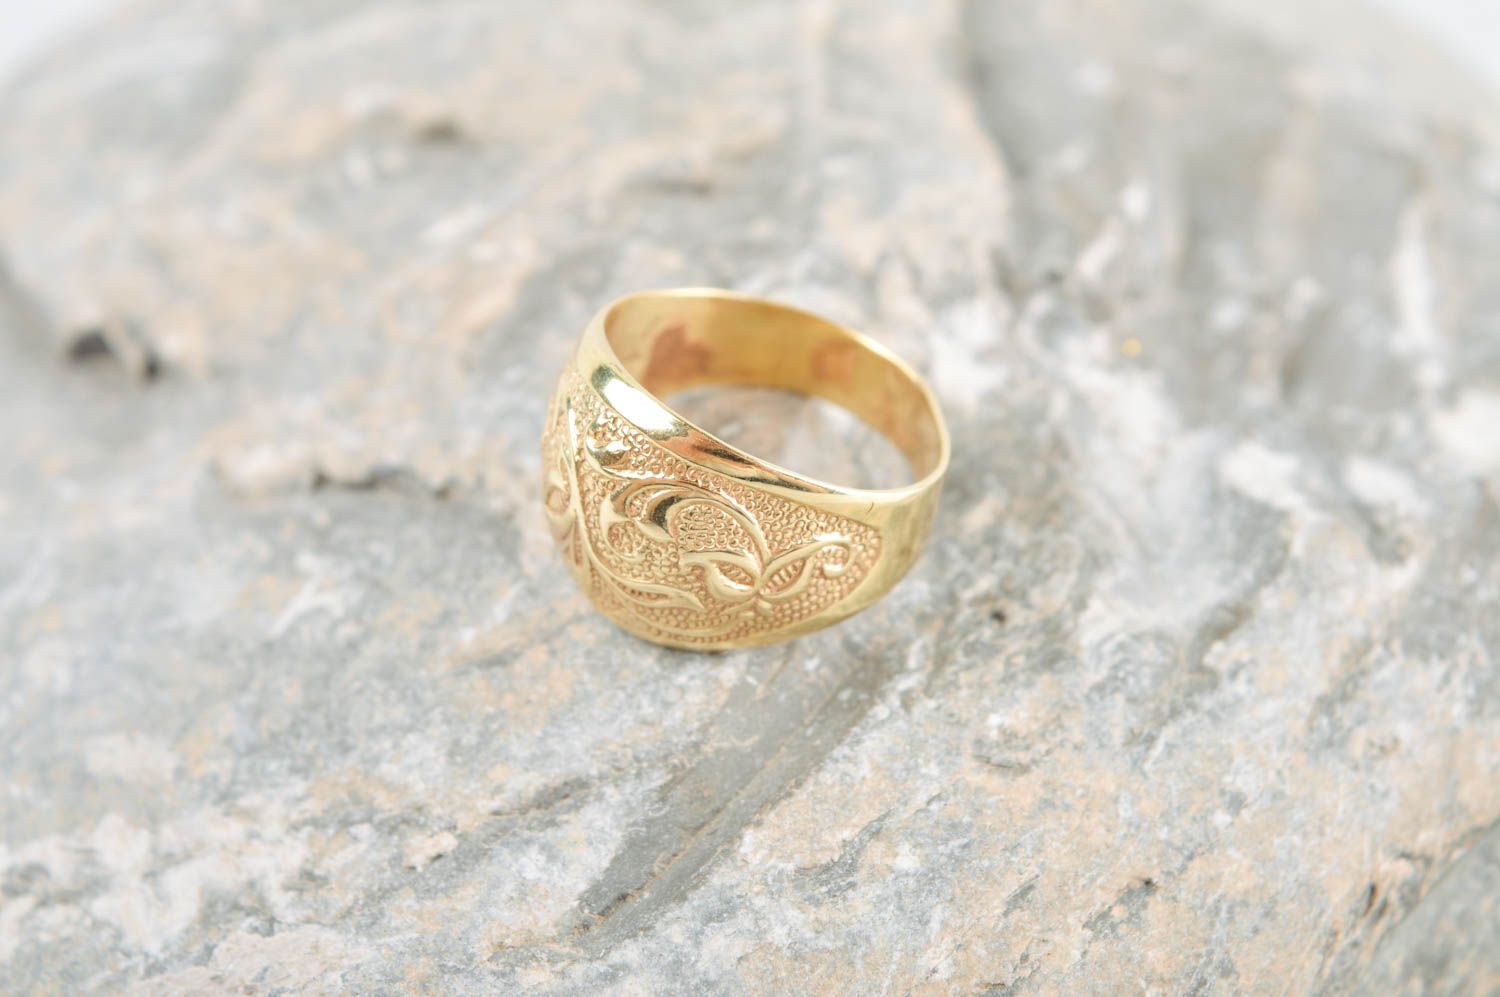 Beautiful handmade metal ring patterned brass ring cool metal jewelry ideas photo 1